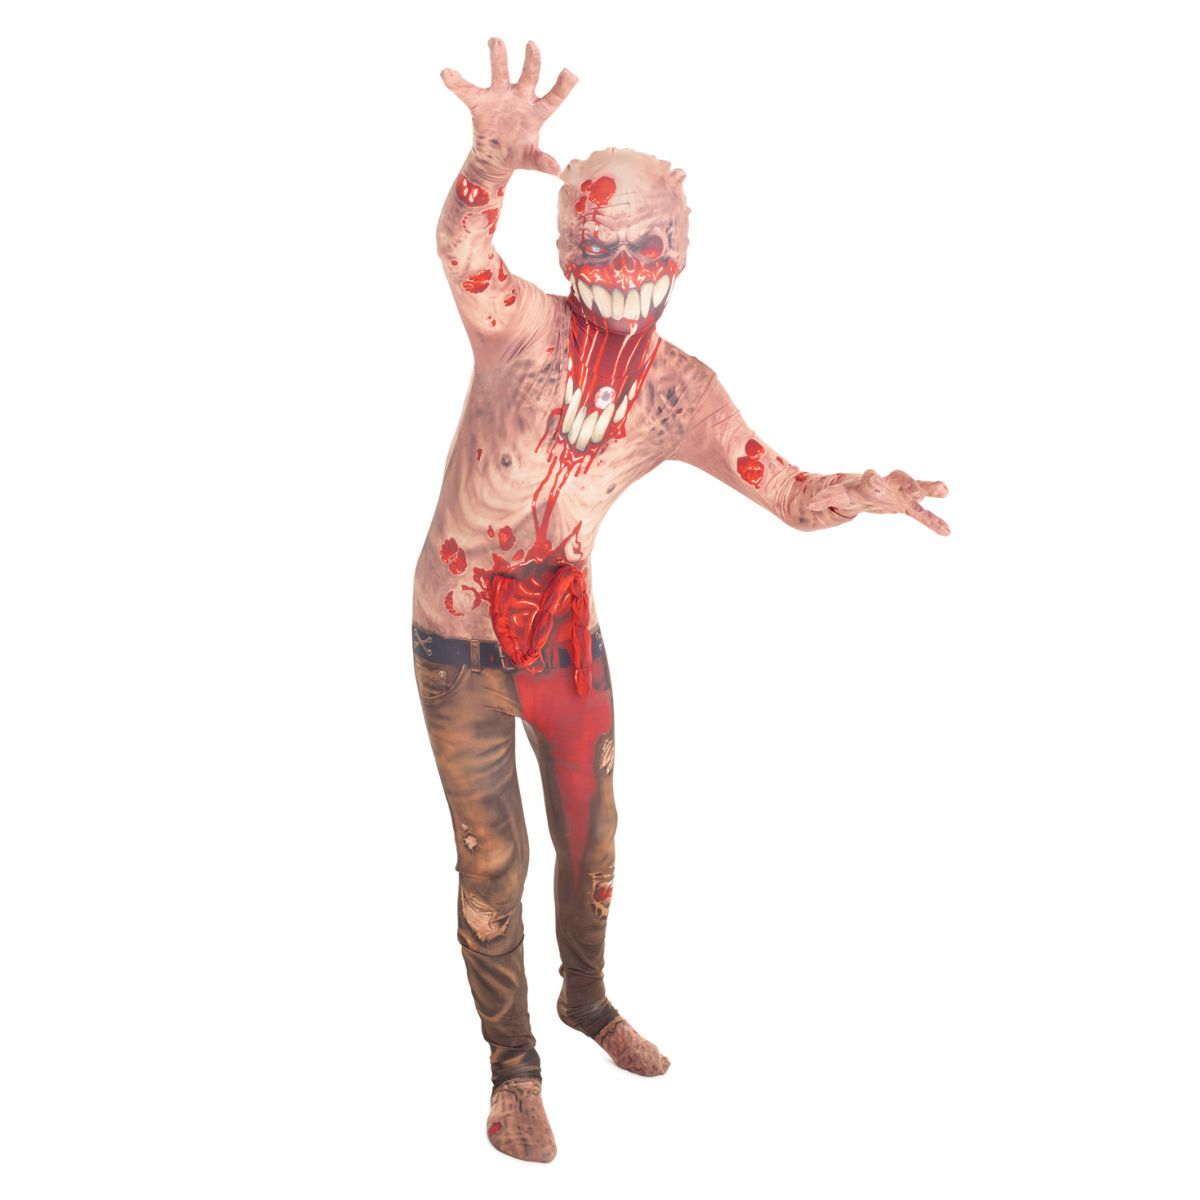 Exploding Guts Zombie Morphsuit Costume Kids